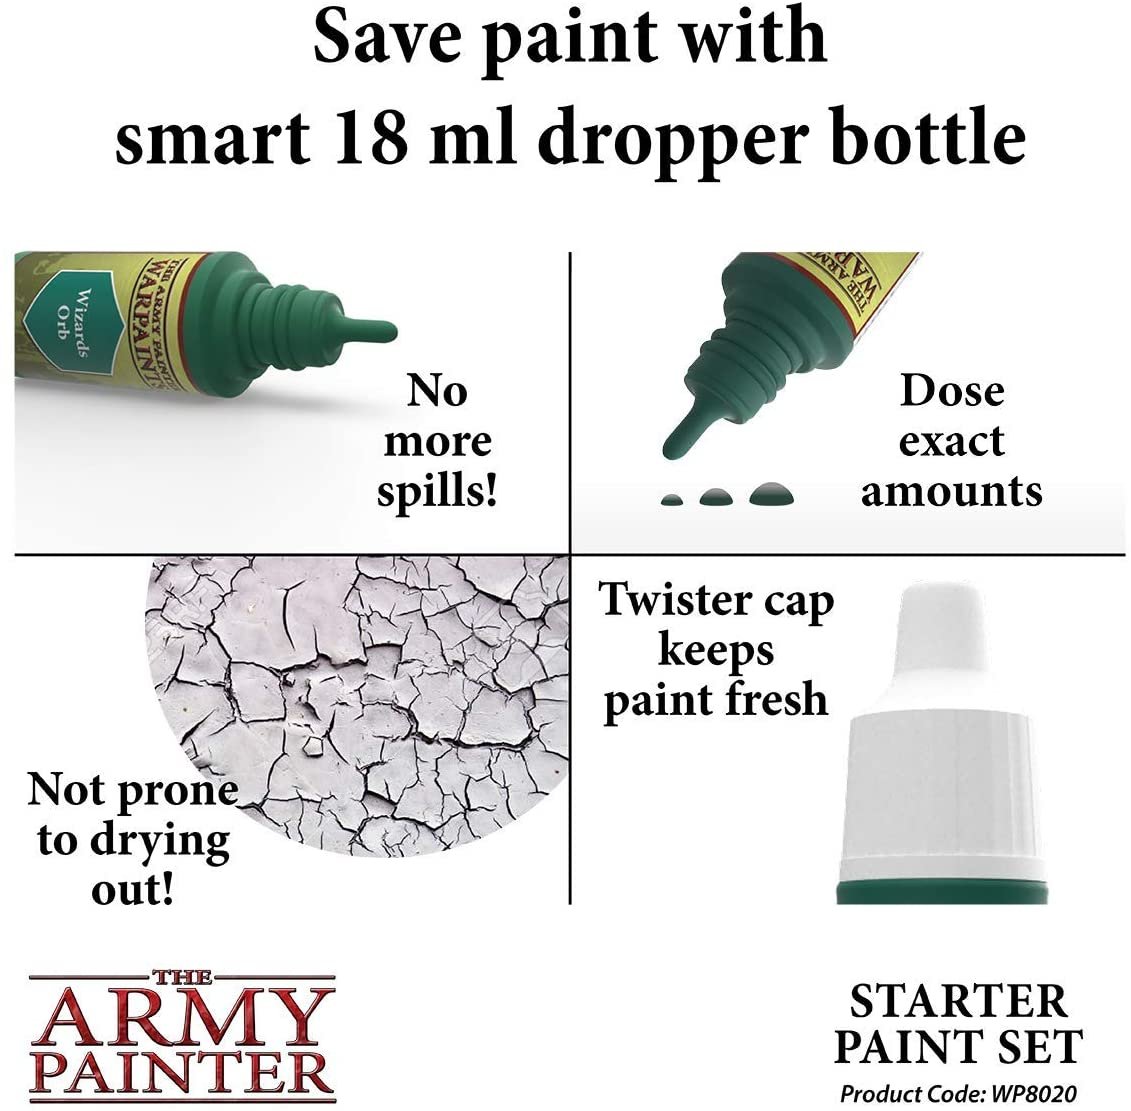 The Army Painter Hobby Starter Paint Set